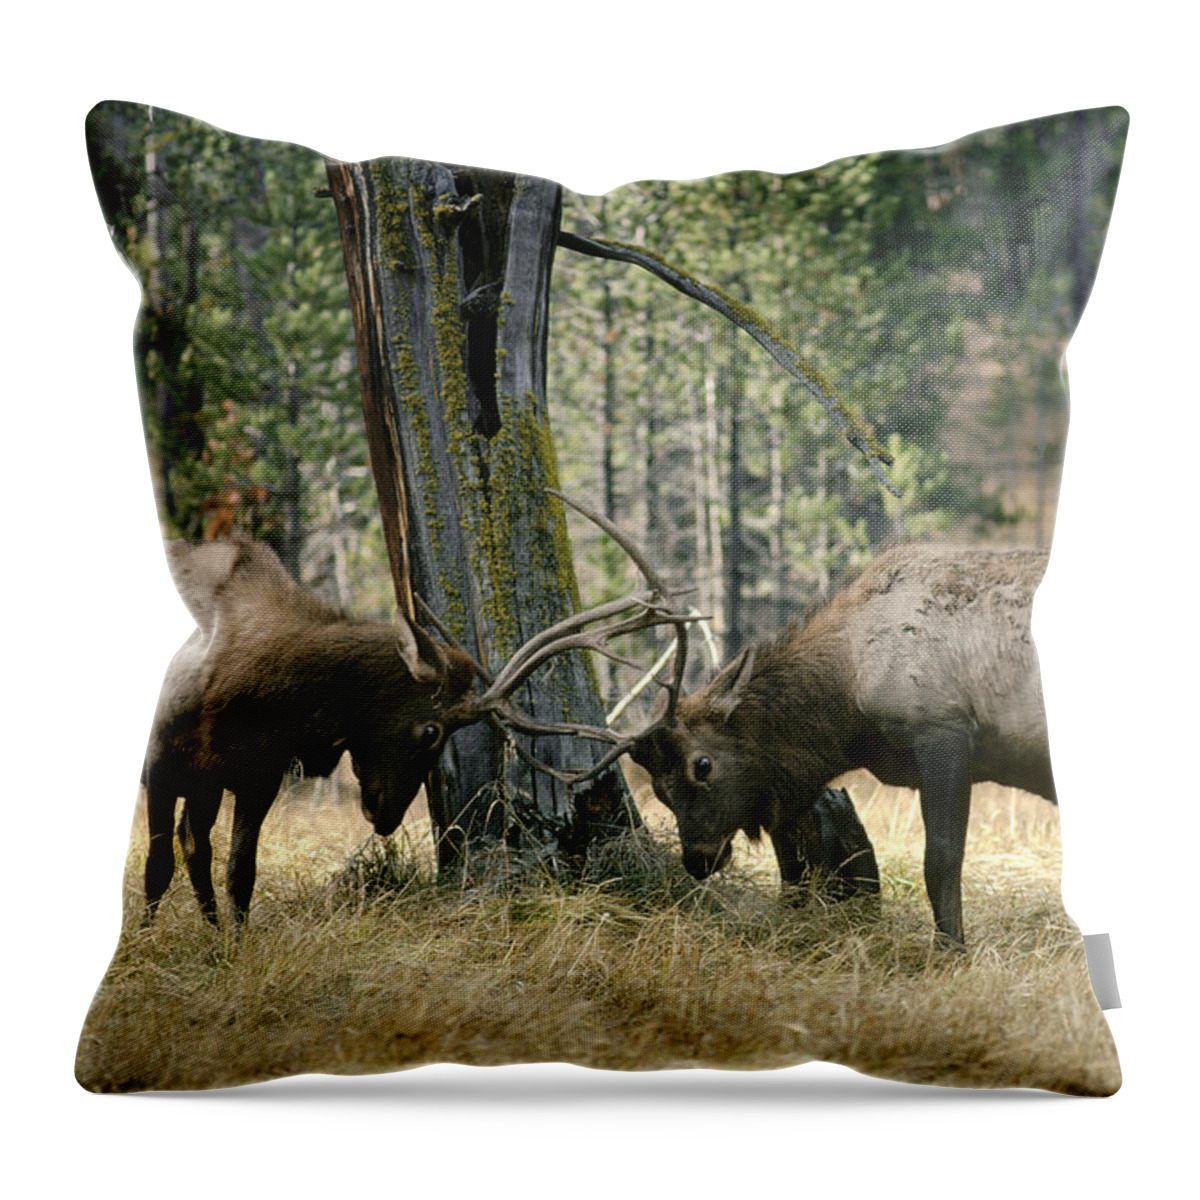 Feb0514 Throw Pillow featuring the photograph Elks Sparring Yellowstone Np Wyoming by Michael Quinton